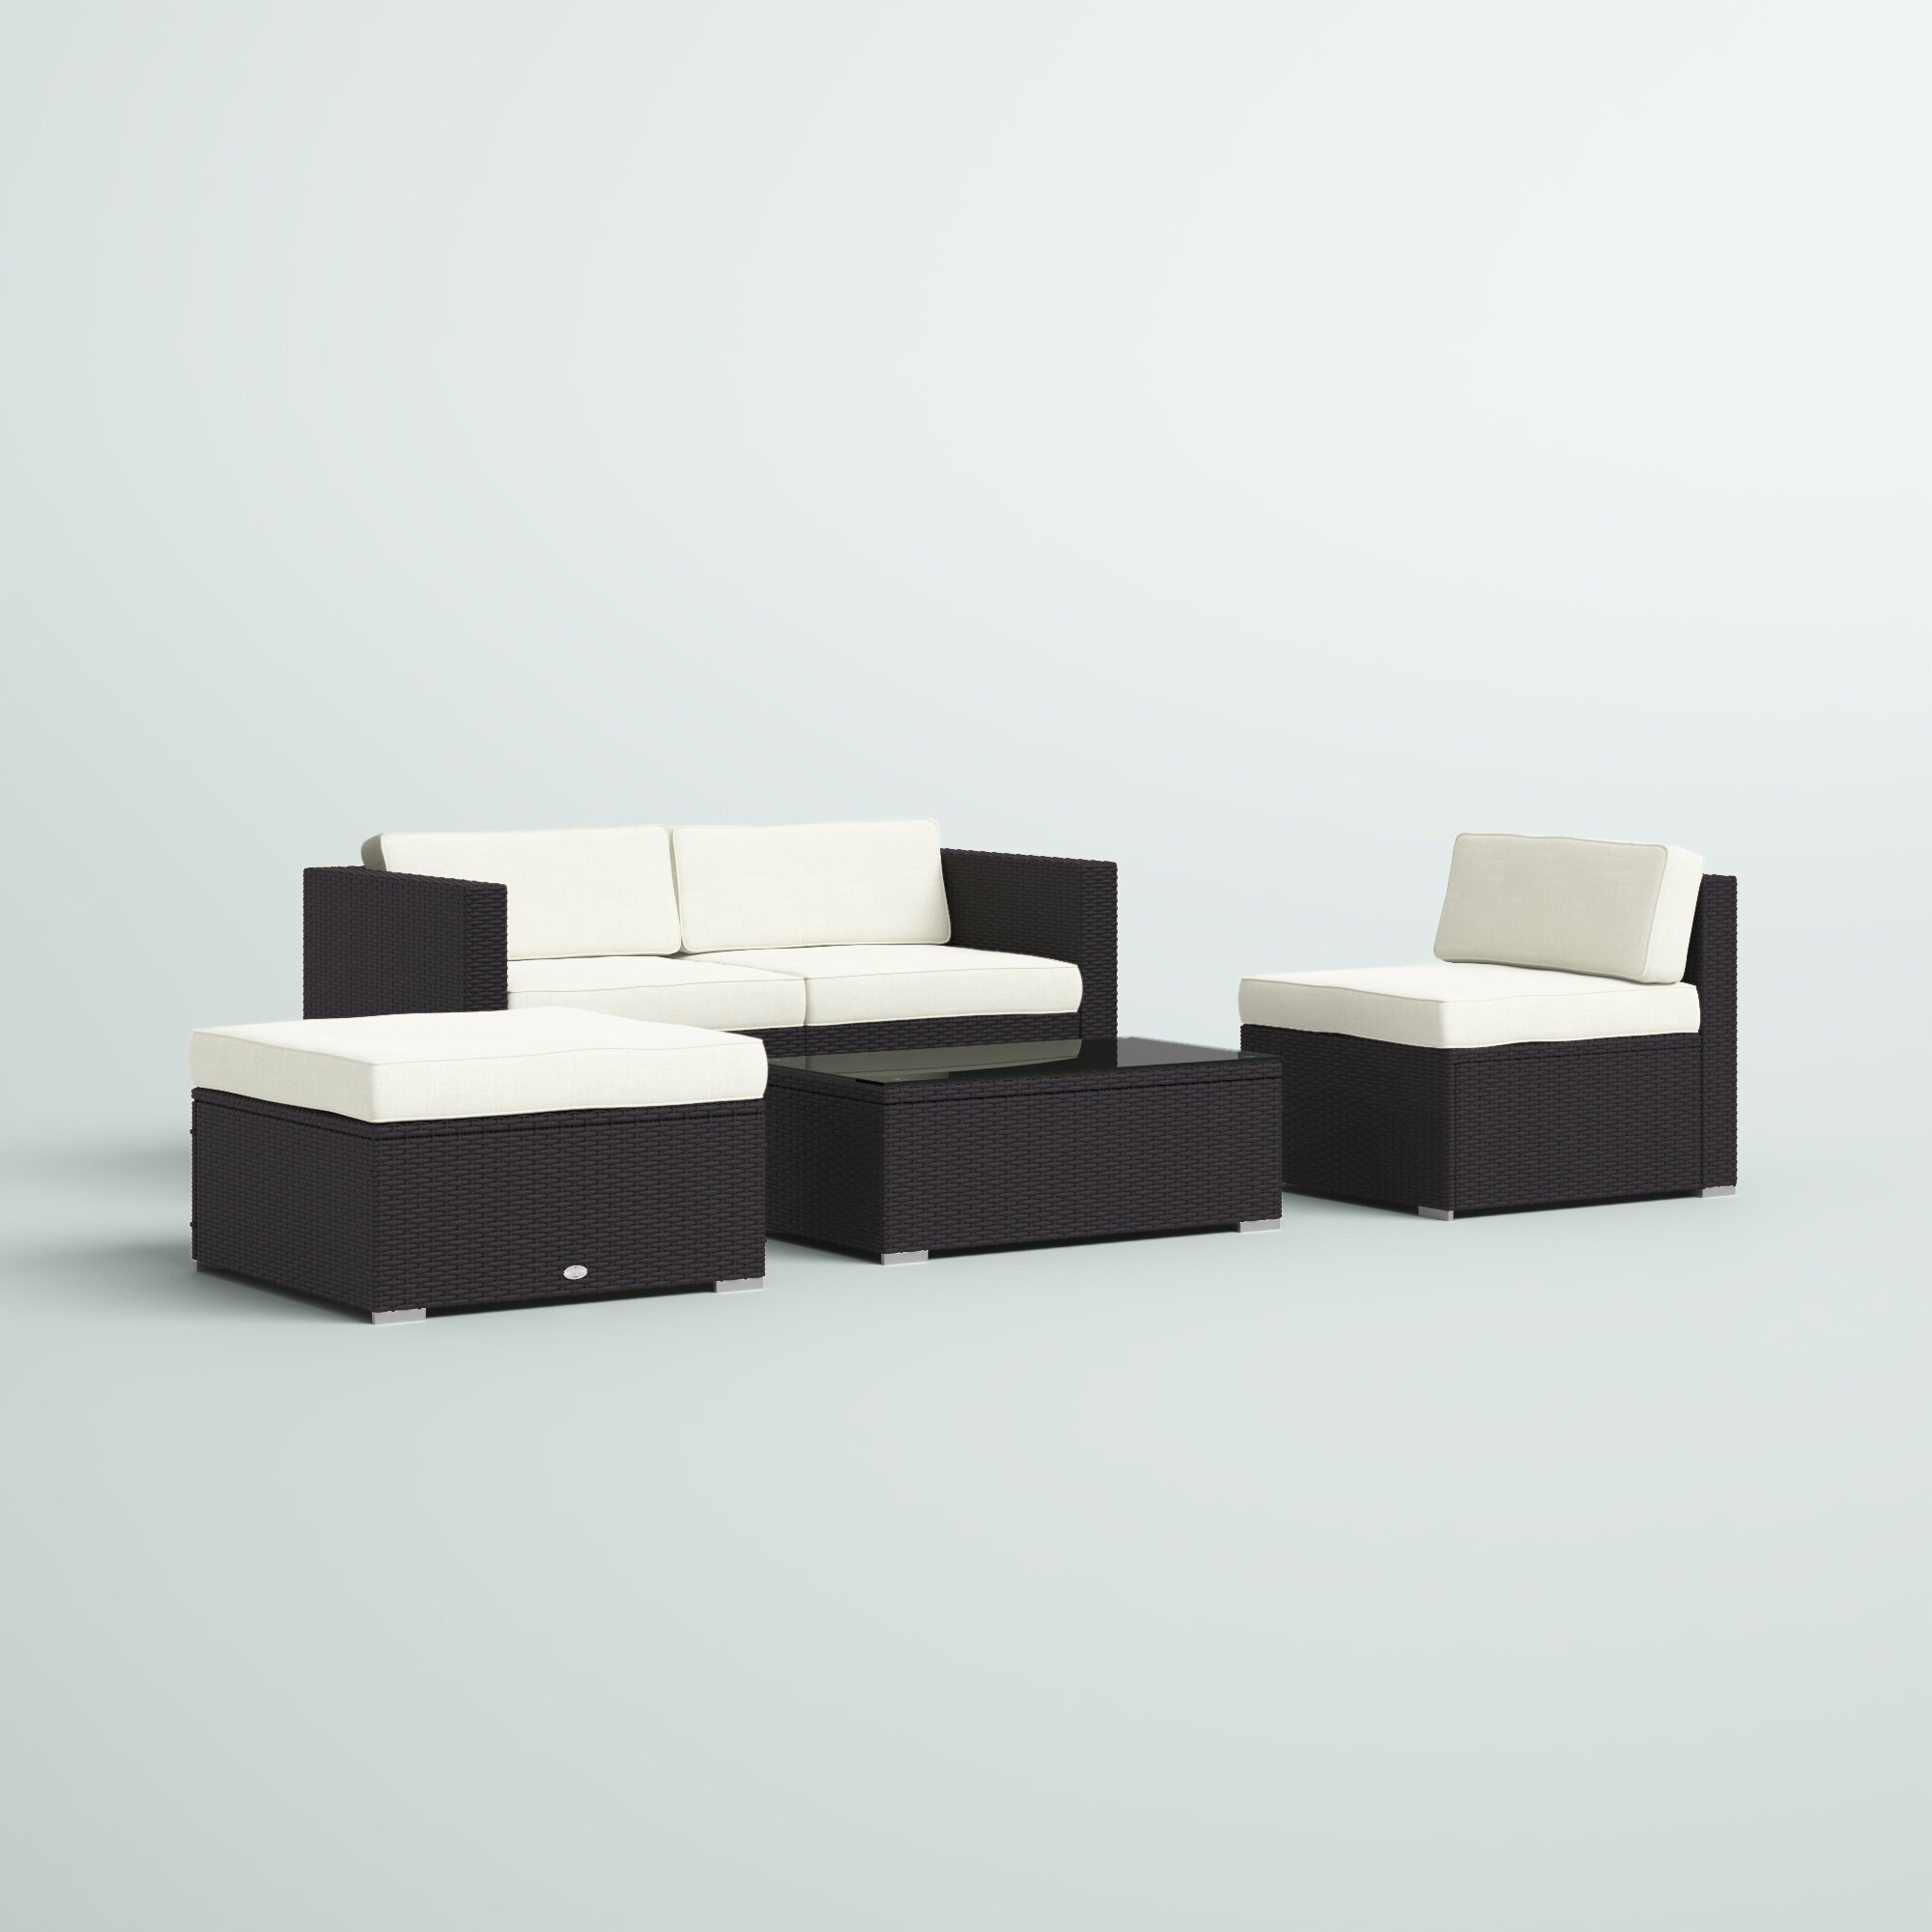 Huang 5 Piece Rattan Sectional Seating Group with Cushions Brayden Studio Cushion Color Beige/Red